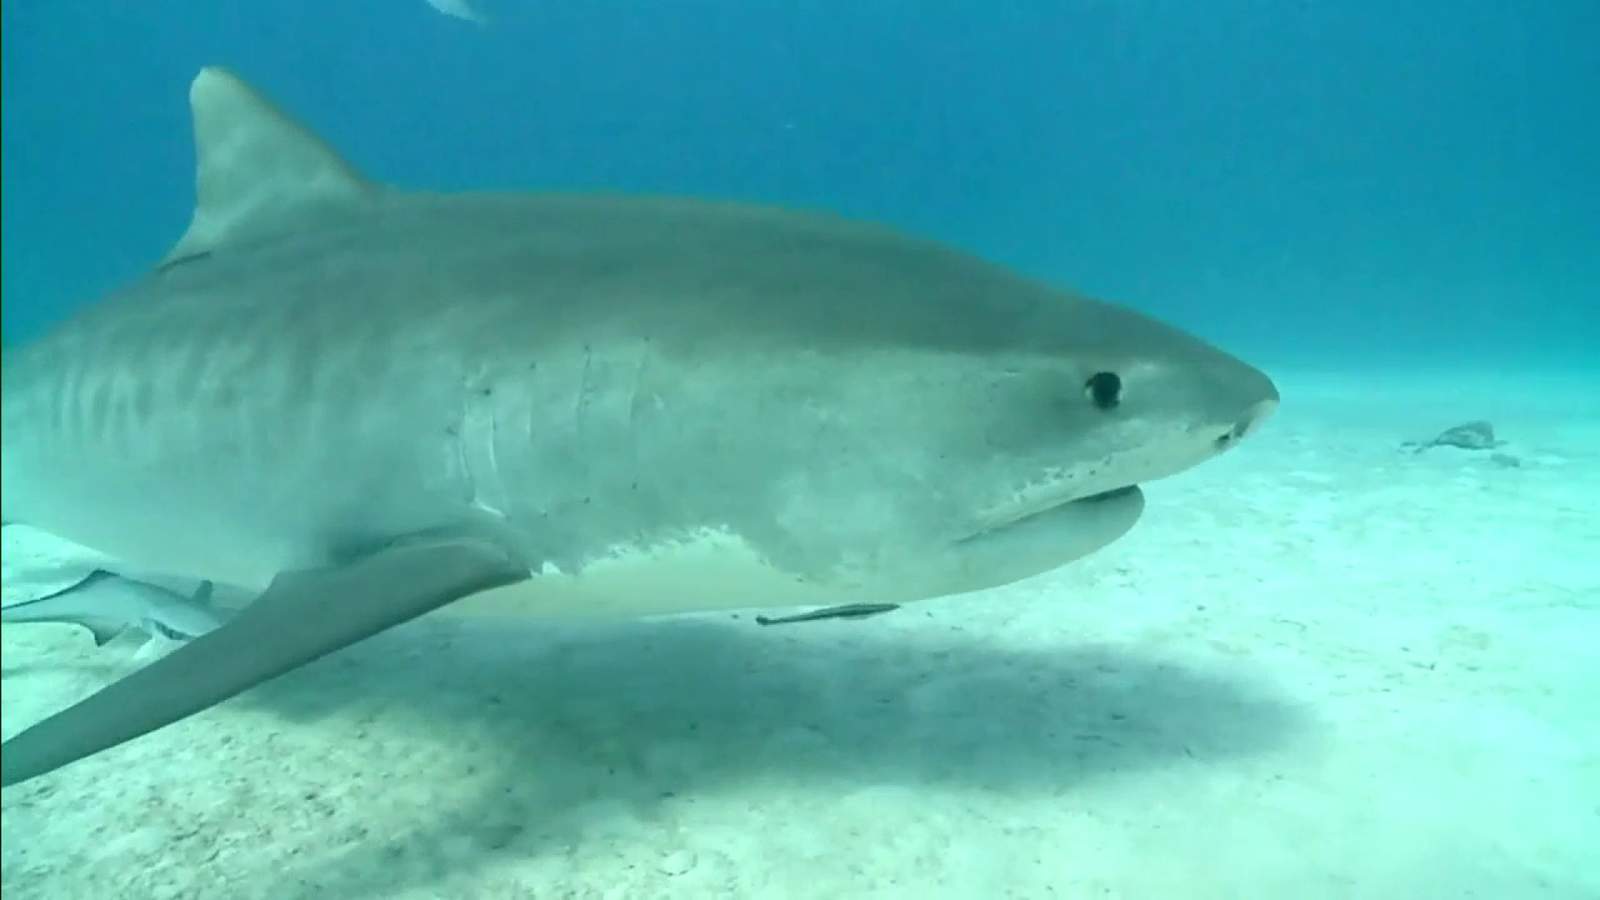 Few shark attacks in 2020, but fatalities spikes